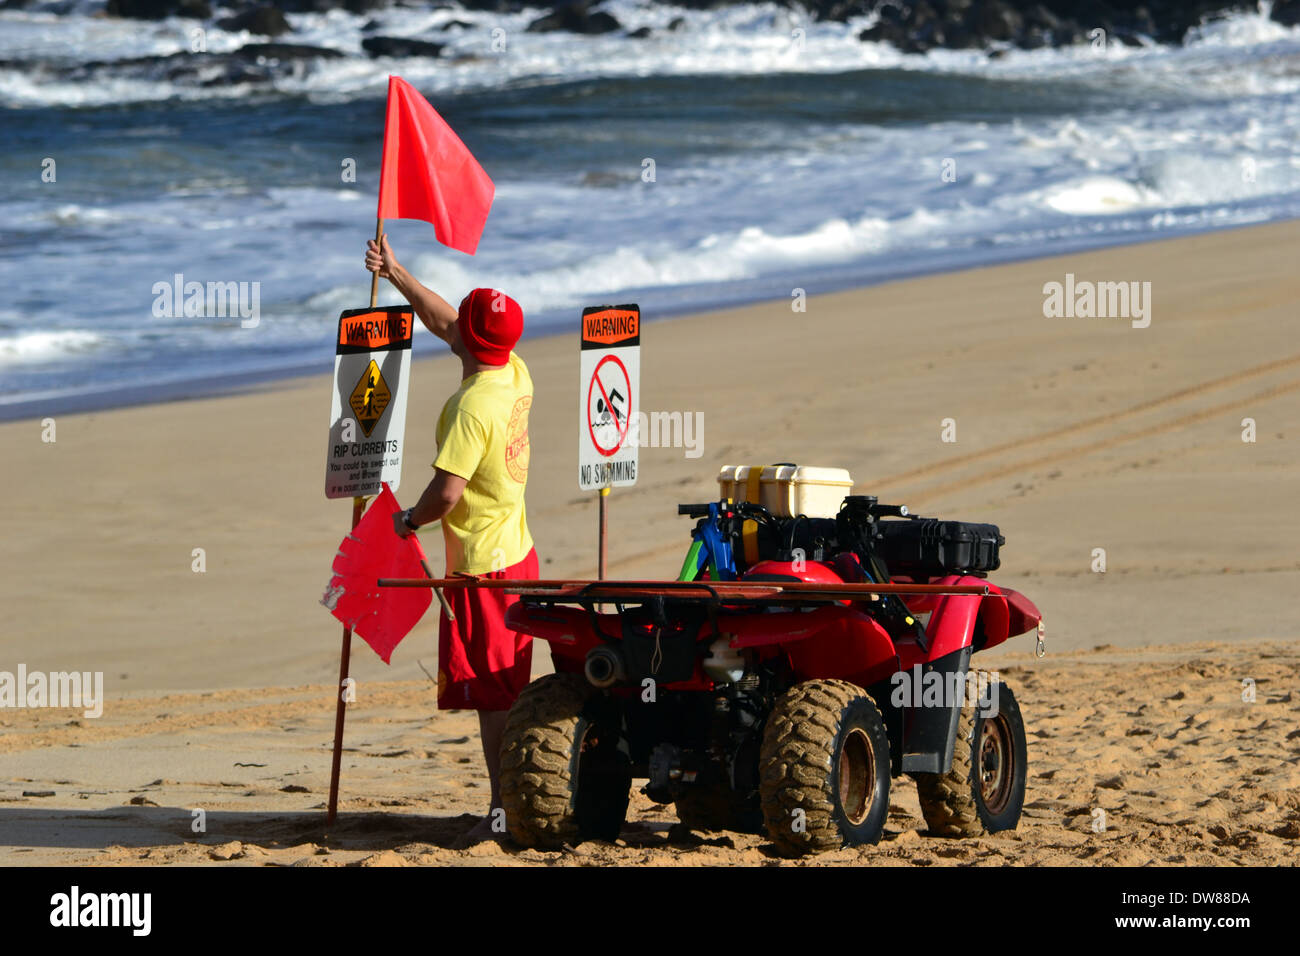 Lifeguard posting red flags warning of the high surf conditions in Waimea Bay, North Shore of Oahu, Hawaii, USA Stock Photo